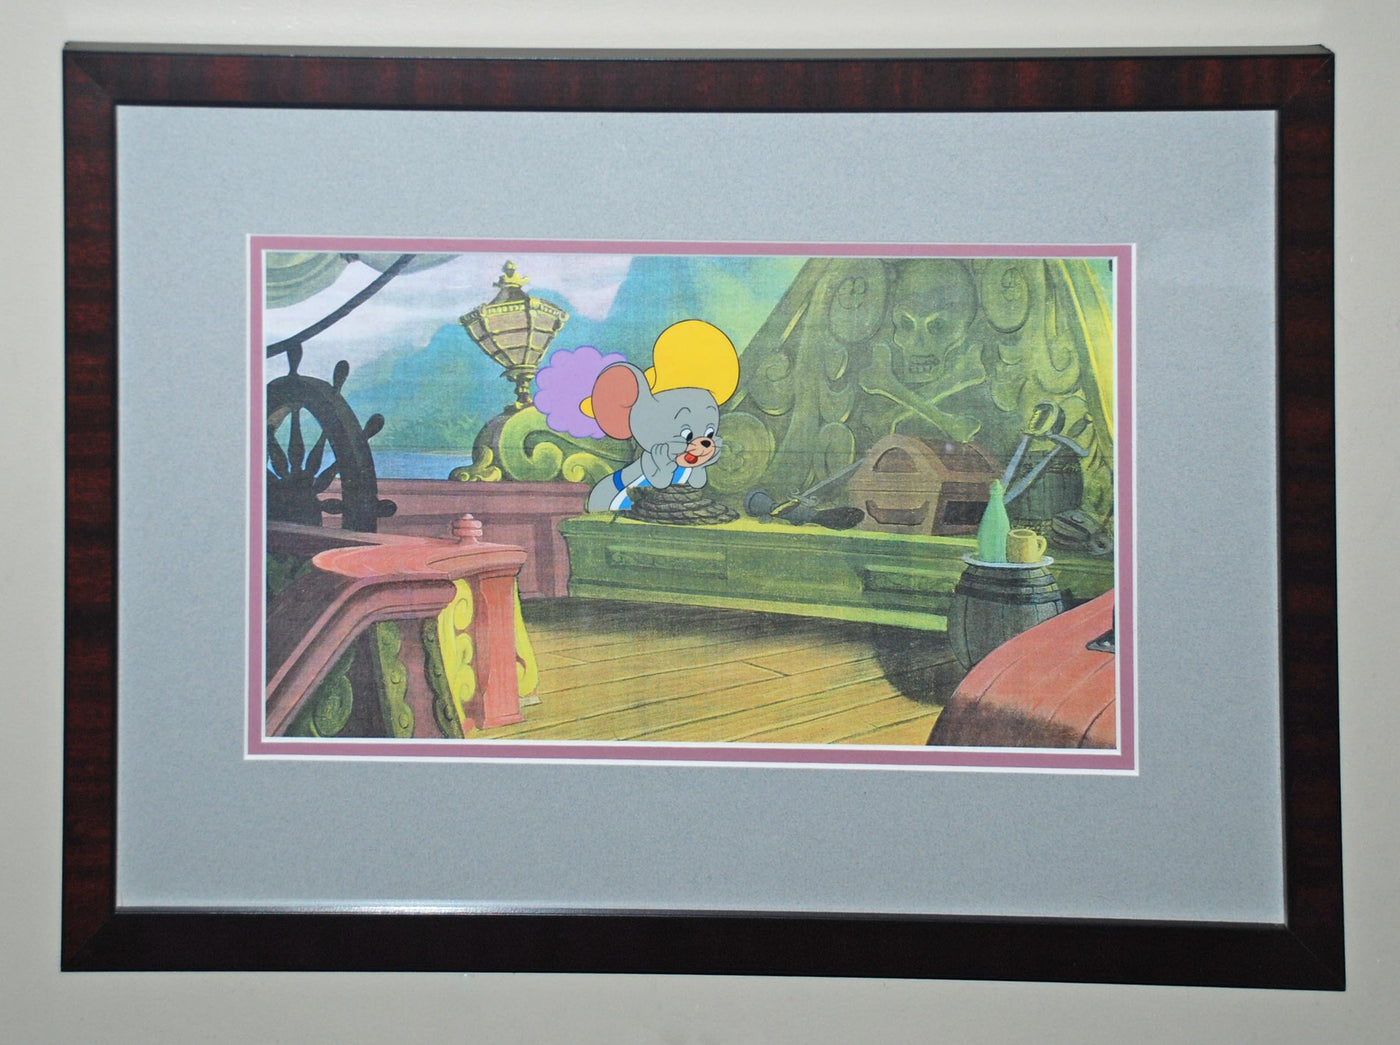 Original Hanna Barbera Production Cel from Tom and Jerry